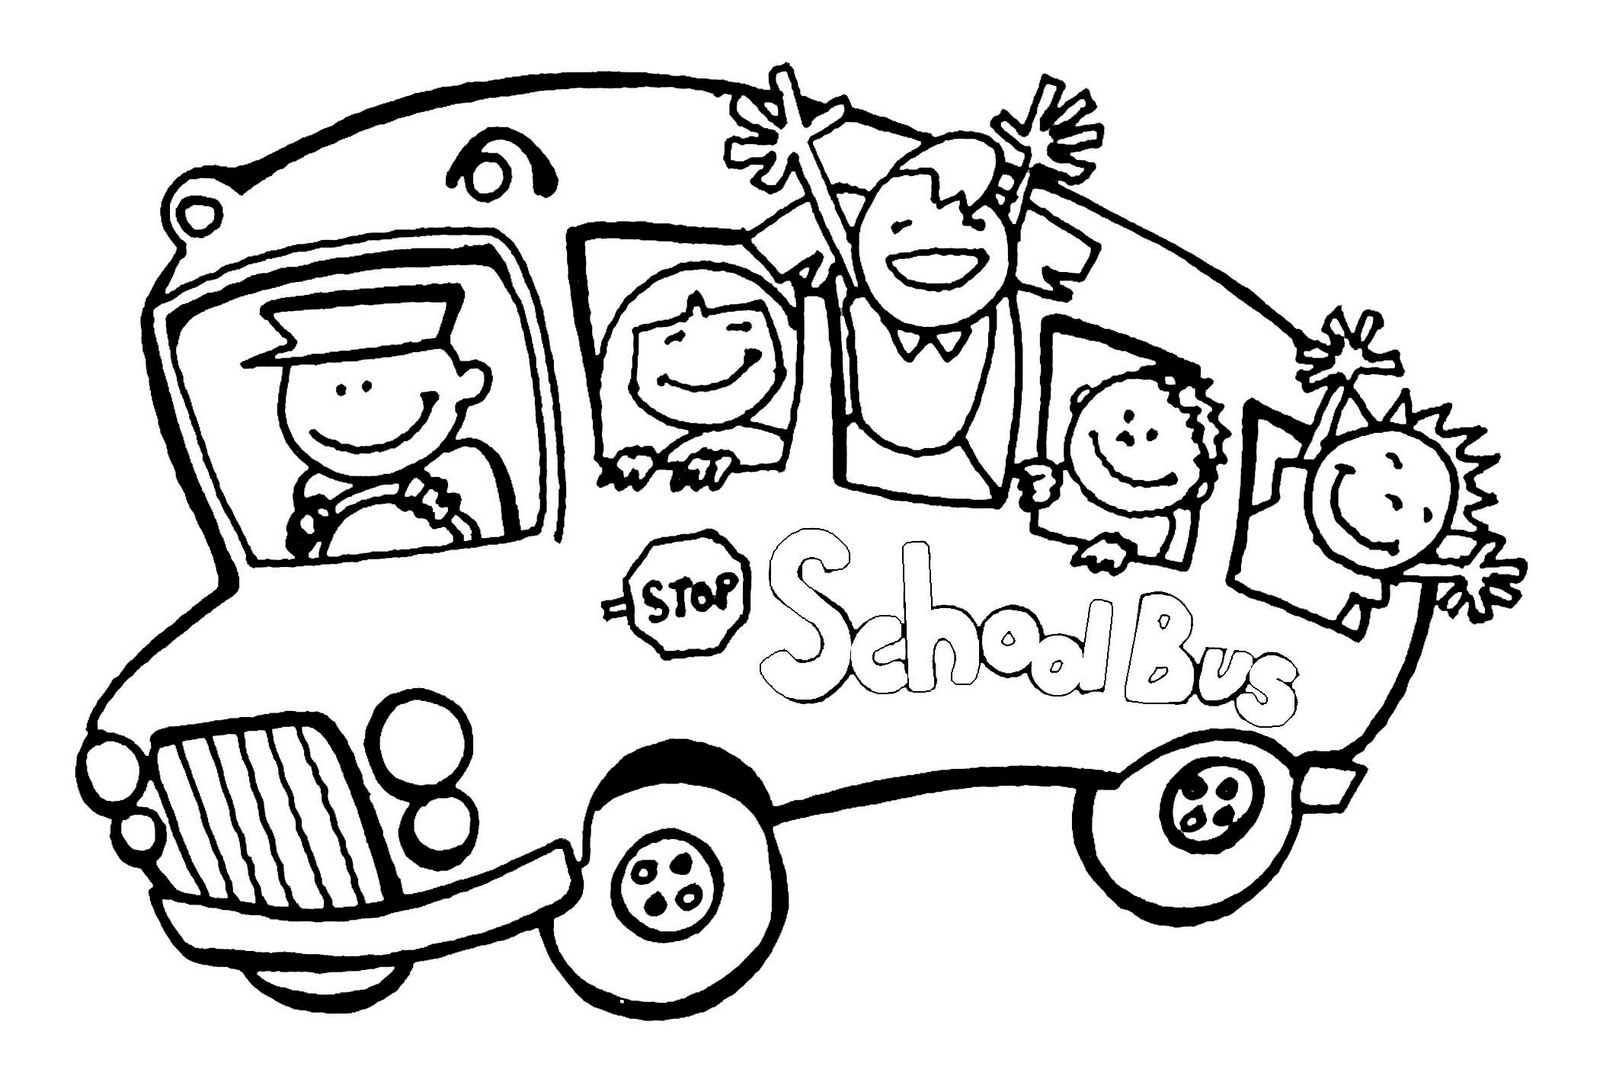 Drawing Of A Bus - Clipart library